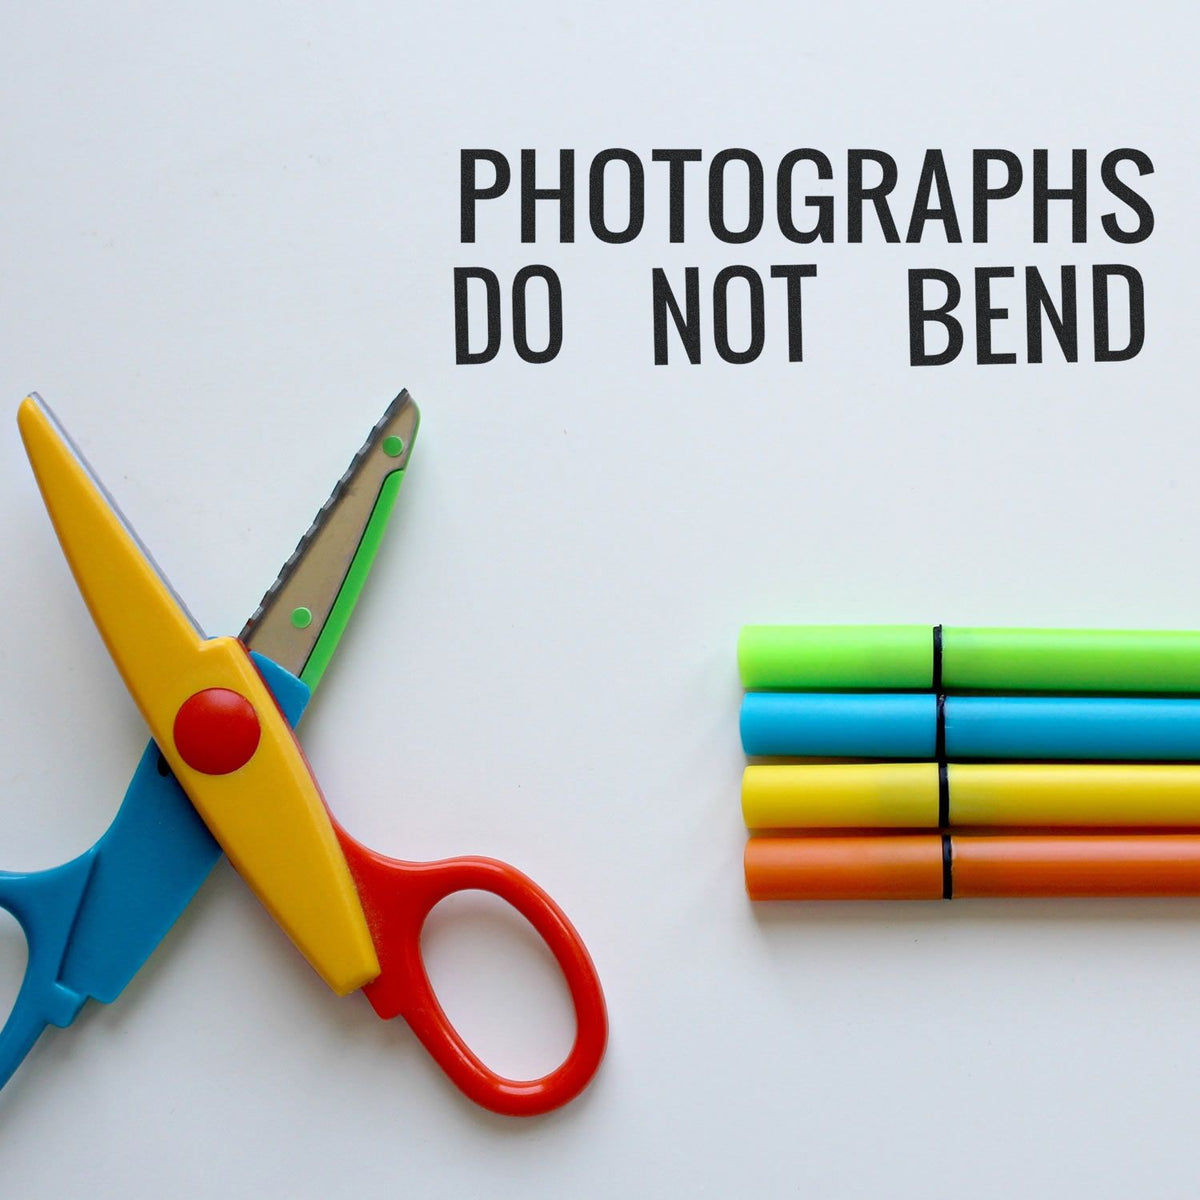 Photographs Do Not Bend Rubber Stamp Lifestyle Photo